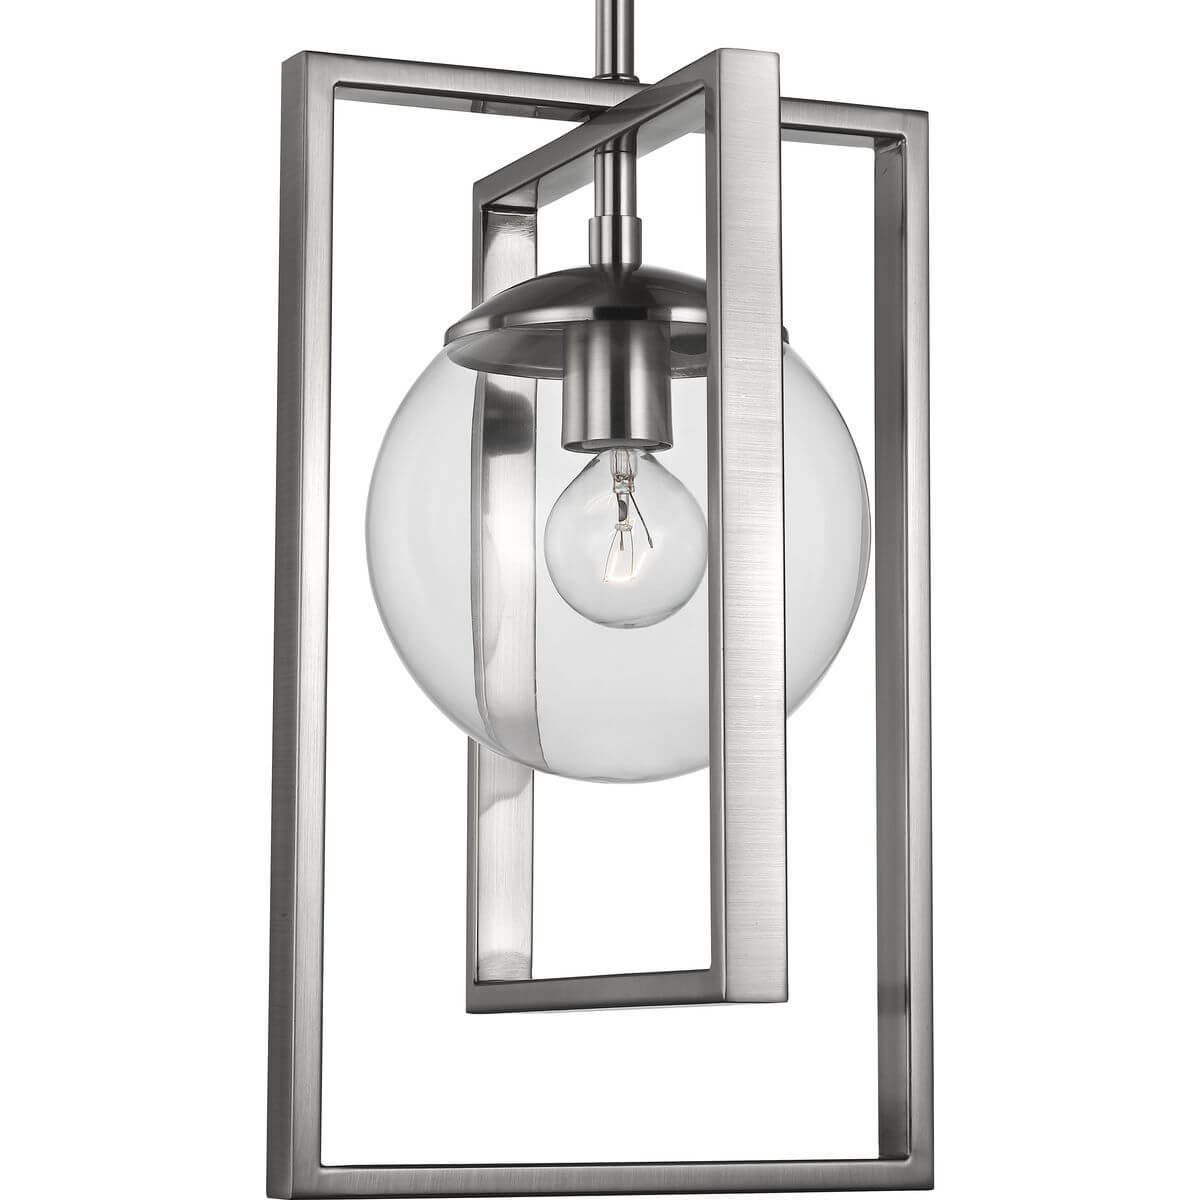 Progress Lighting Atwell 1 Light 8 inch Pendant in Brushed Nickel with Clear Glass P500283-009